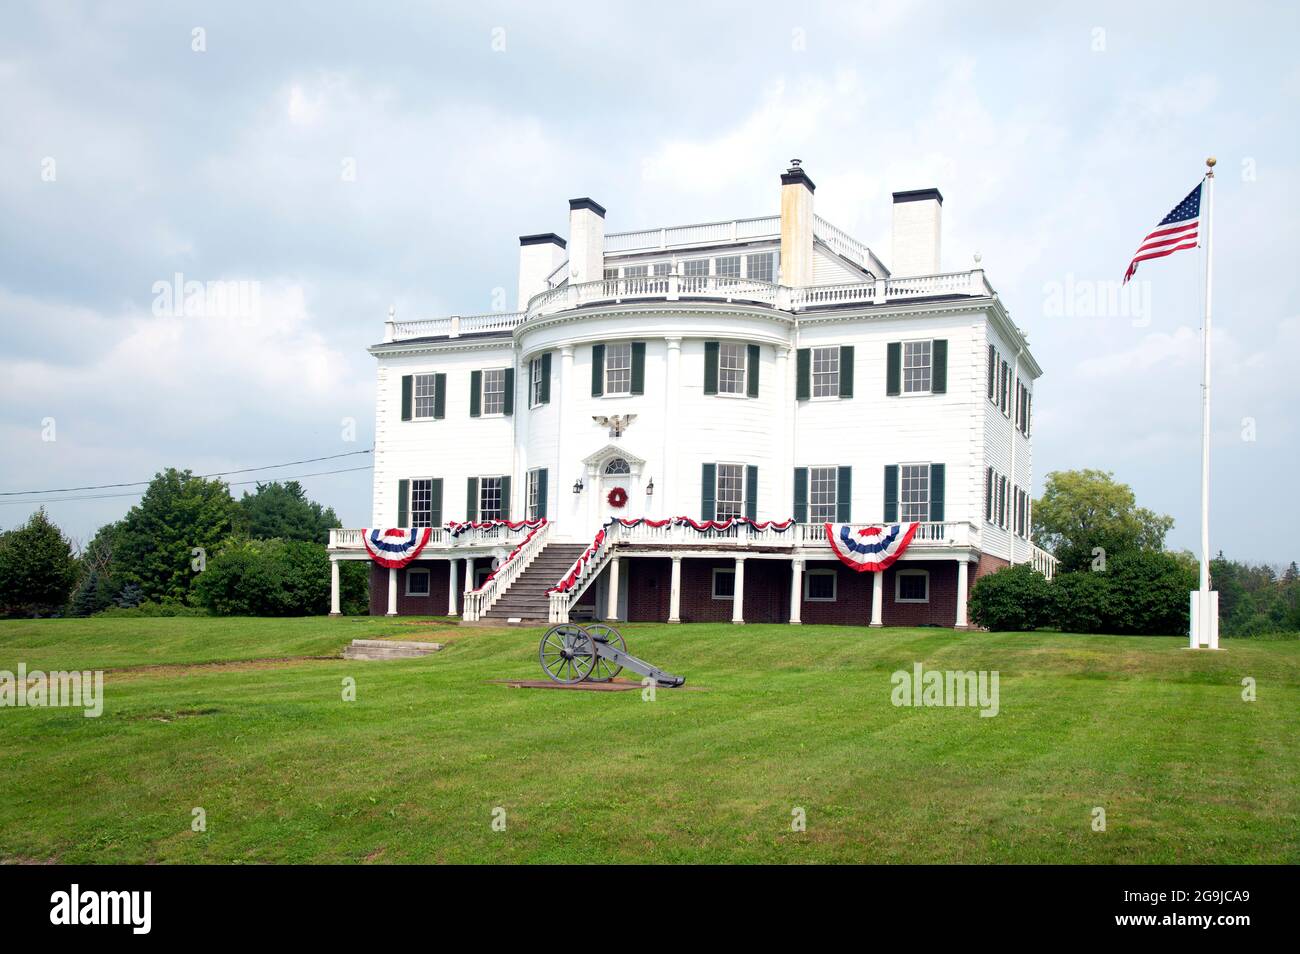 Montpelier - the home of Revolutionary War General and Secretary of War, Henry Knox in Thomaston, Maine, USA.  Built in 1795 - present replica 1929. Stock Photo